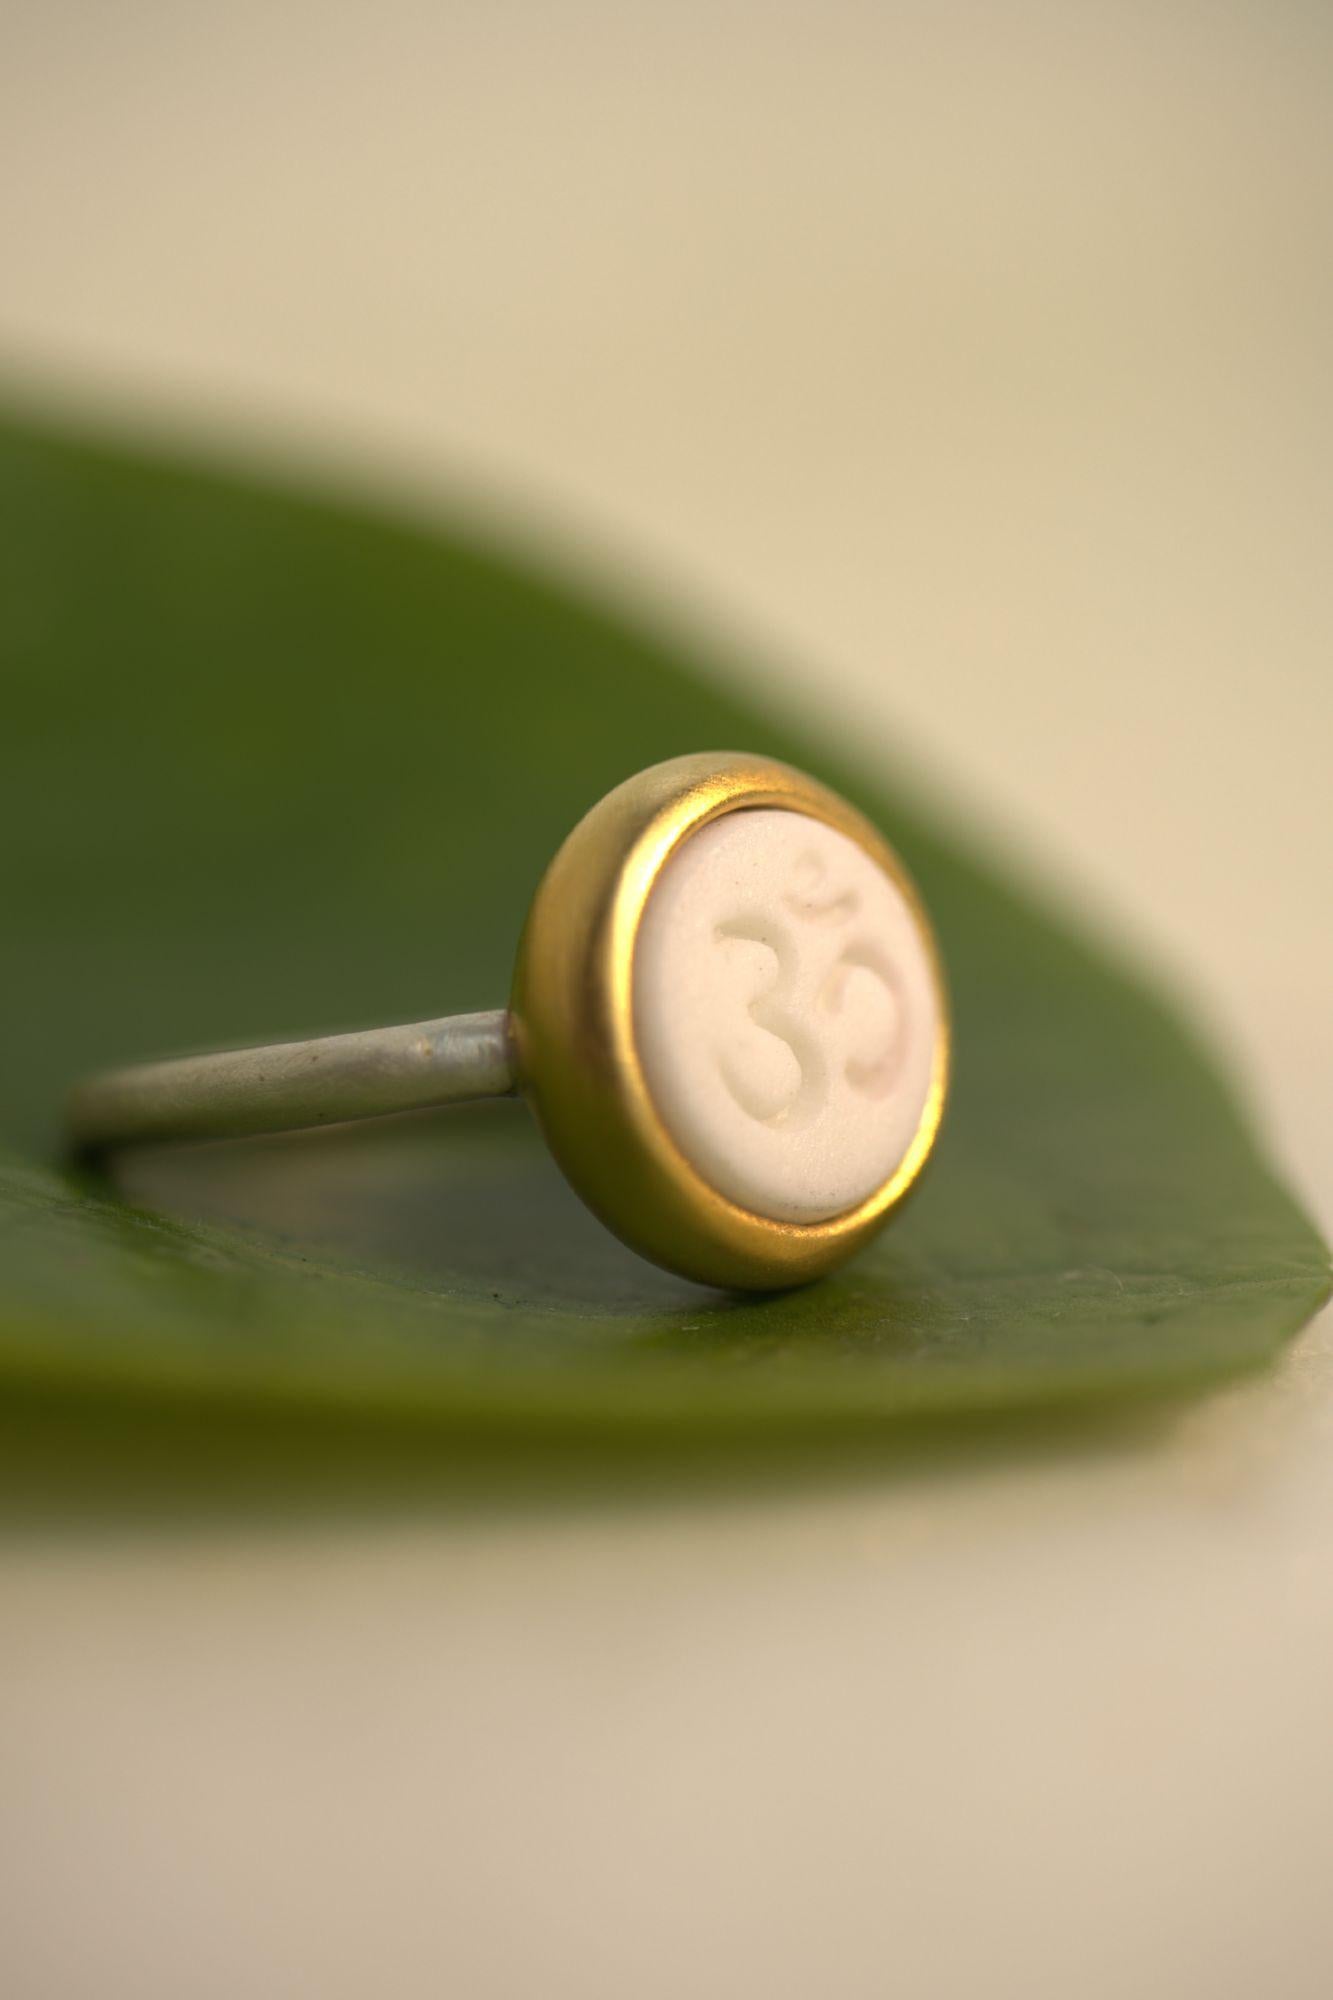 For Sale:  Monika Herré Porcelain Ring Ohm Symbol Small sterling silver gold-plated 5